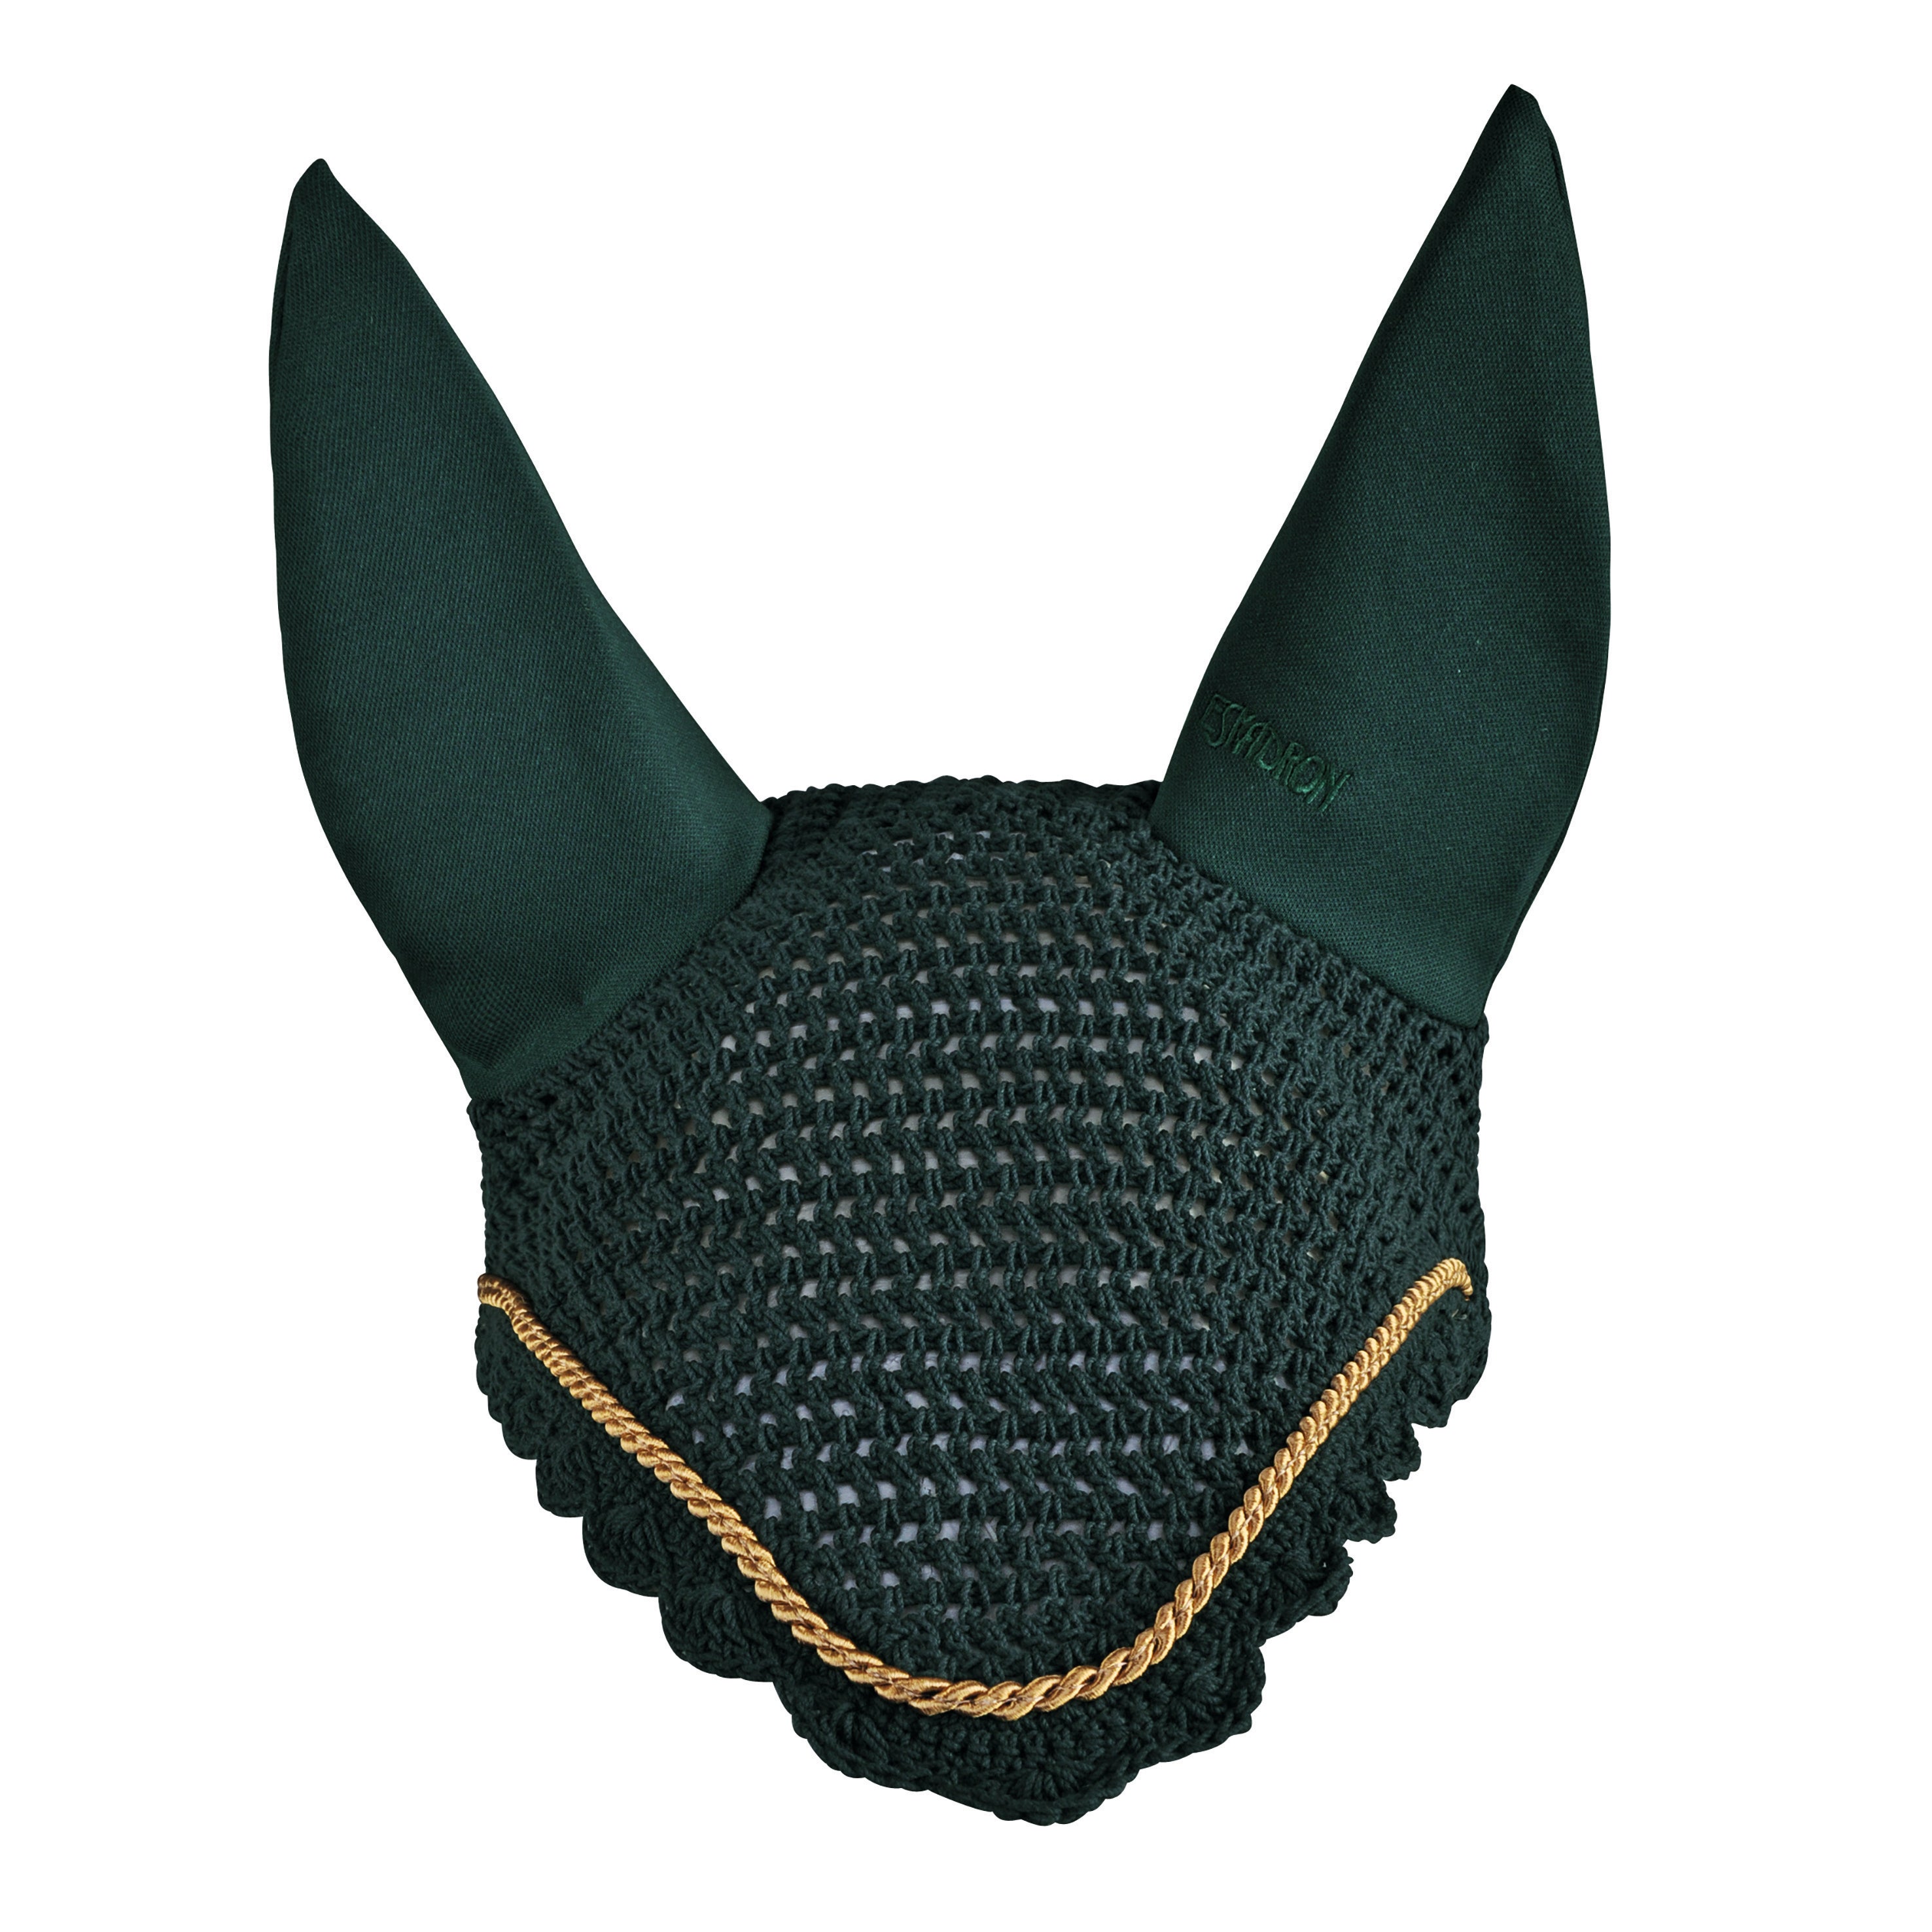 Eskadron Anti-Fly Hood with Gold Piping